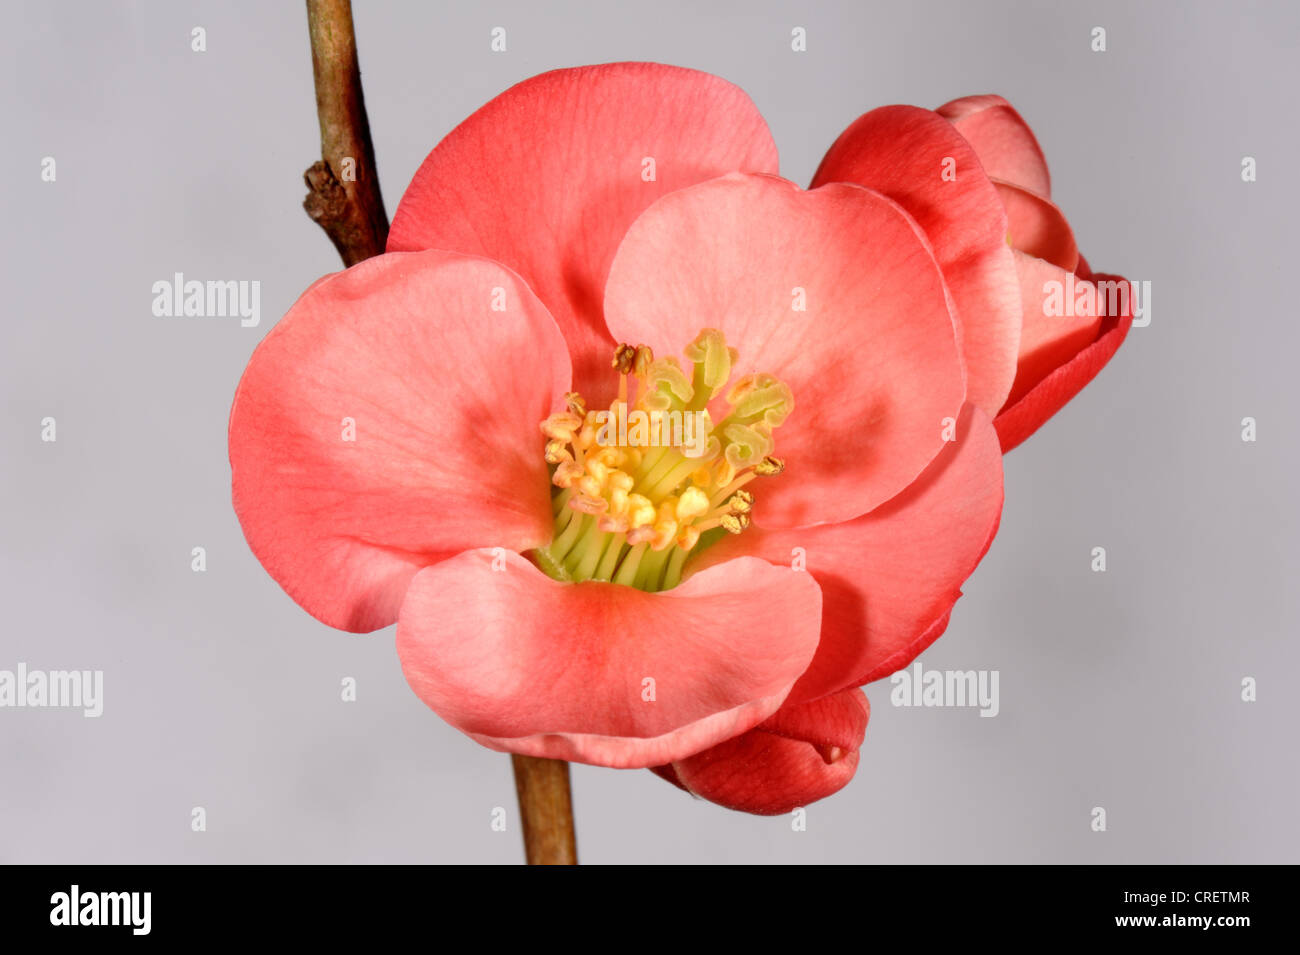 Chaenomeles japonica pink/red flower on a white background Stock Photo